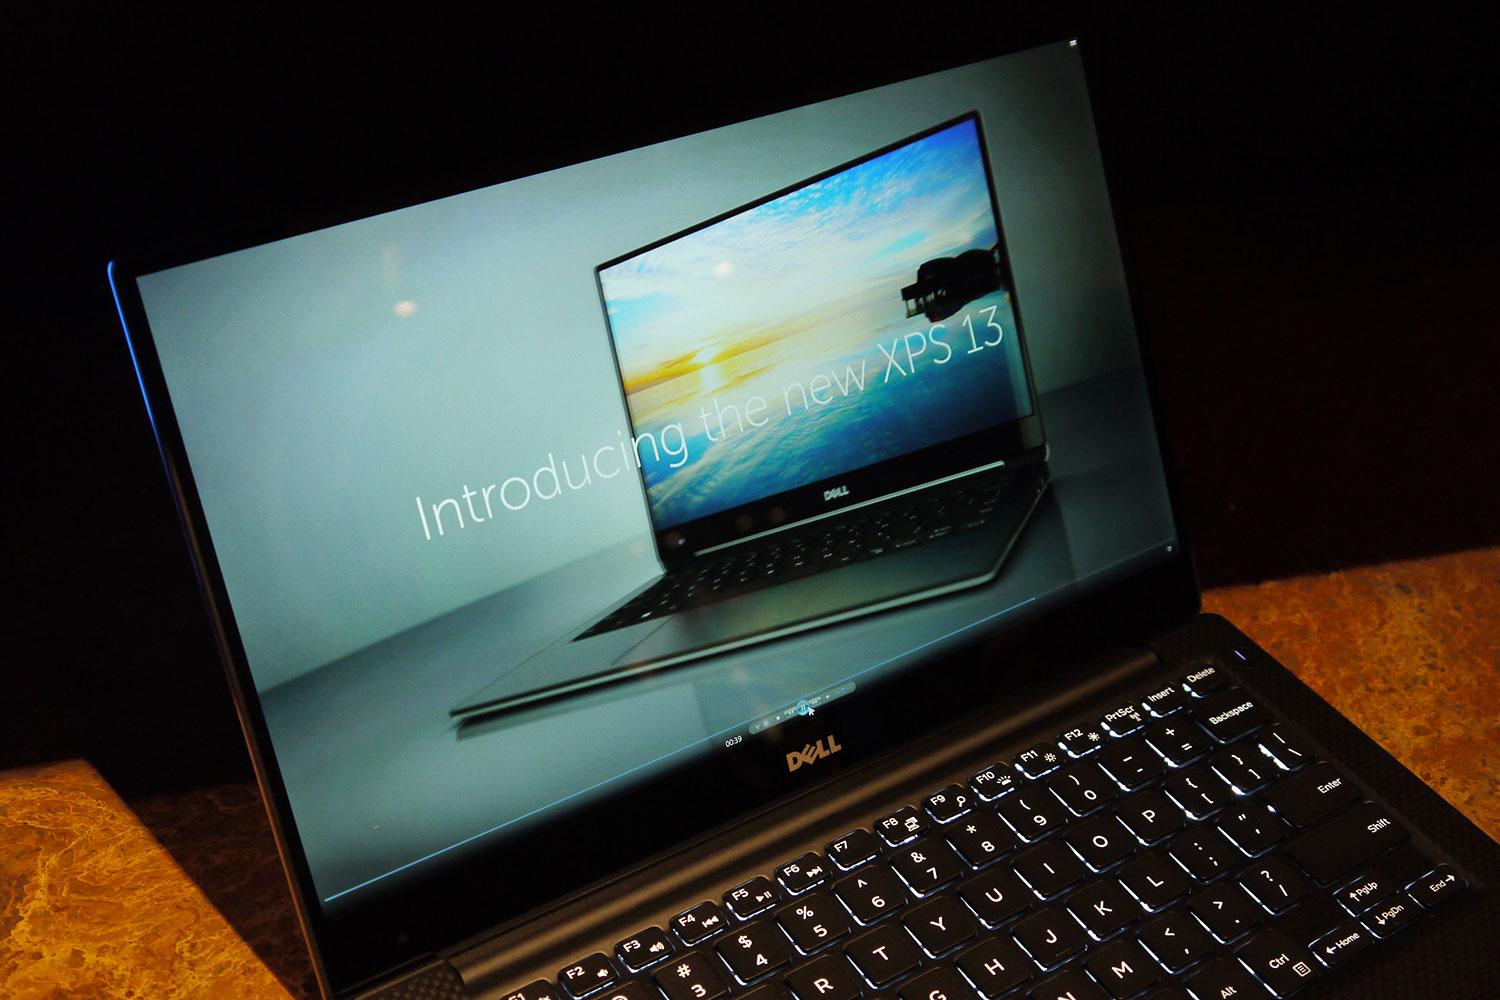 dell xps 13 laptop has a screen with virtually no bezel hands on p1100313